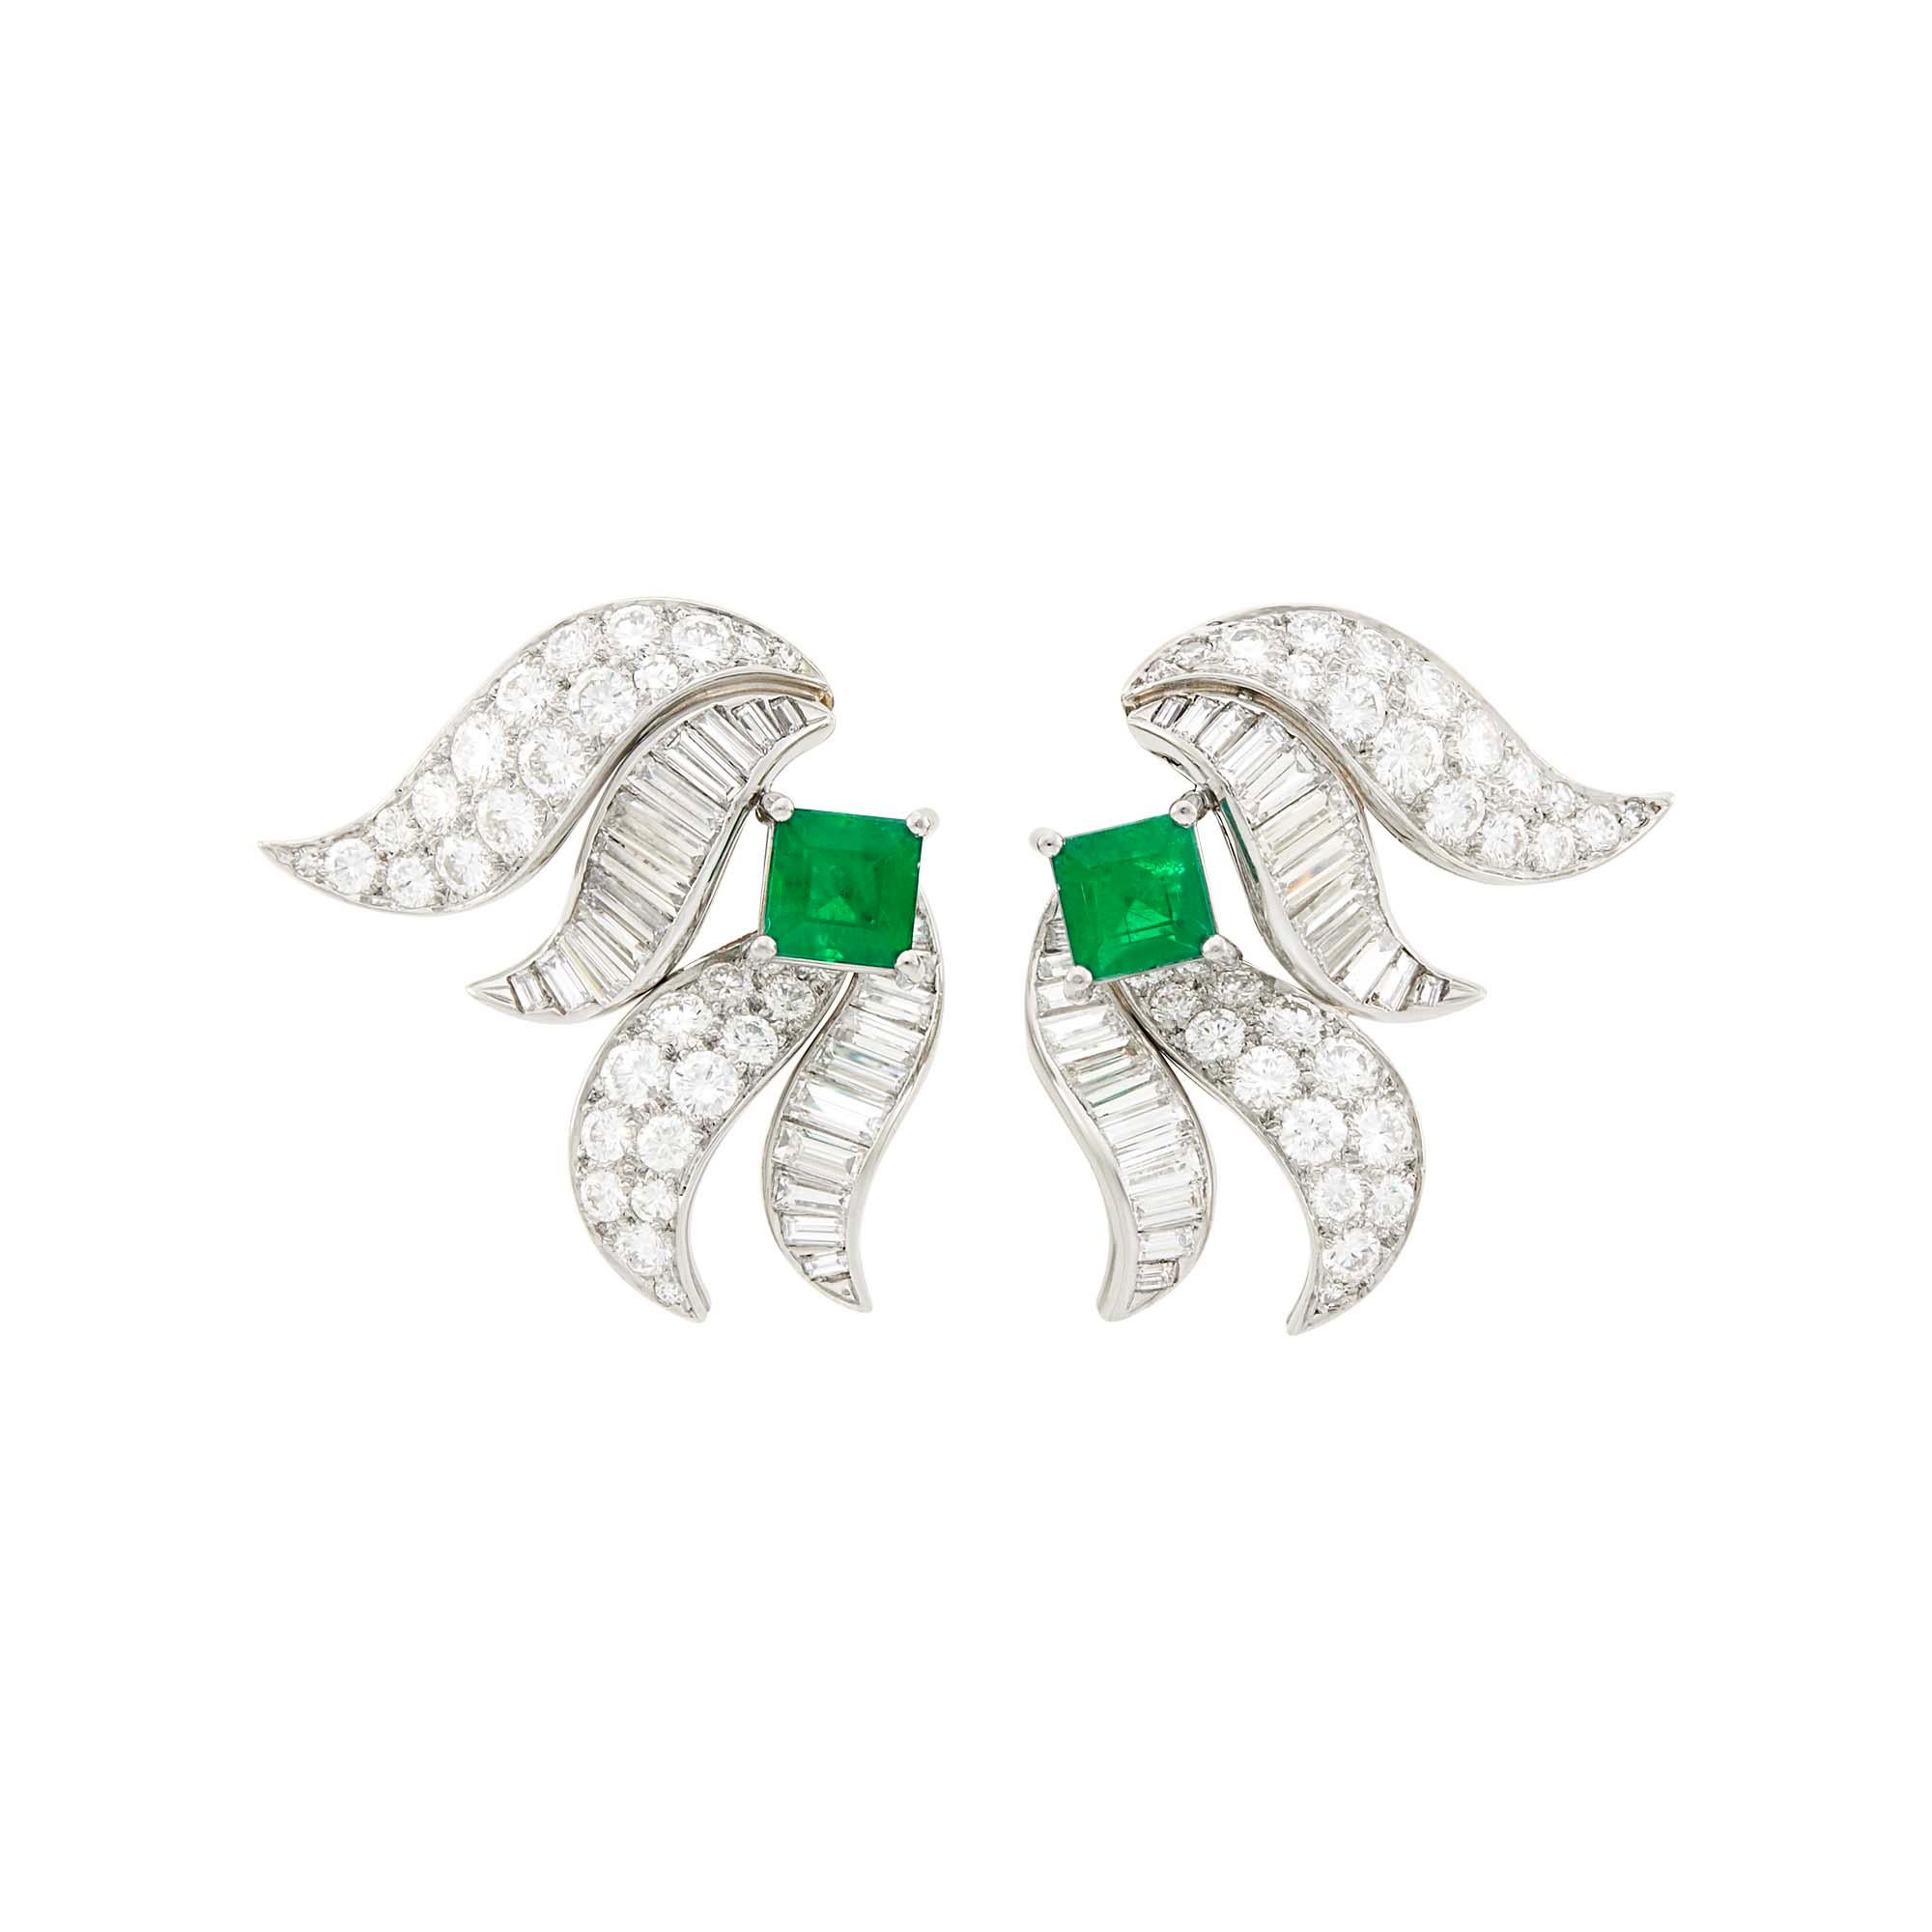 . Pair of Platinum, Emerald   and Diamond Ear-clips 
The flared ribbon earrings centering 2 square-cut emeralds  1.60 carats., set with 50 round and 46 baguette and tapered baguette diamonds ap. 6.20 carats accented by small diamonds all set in